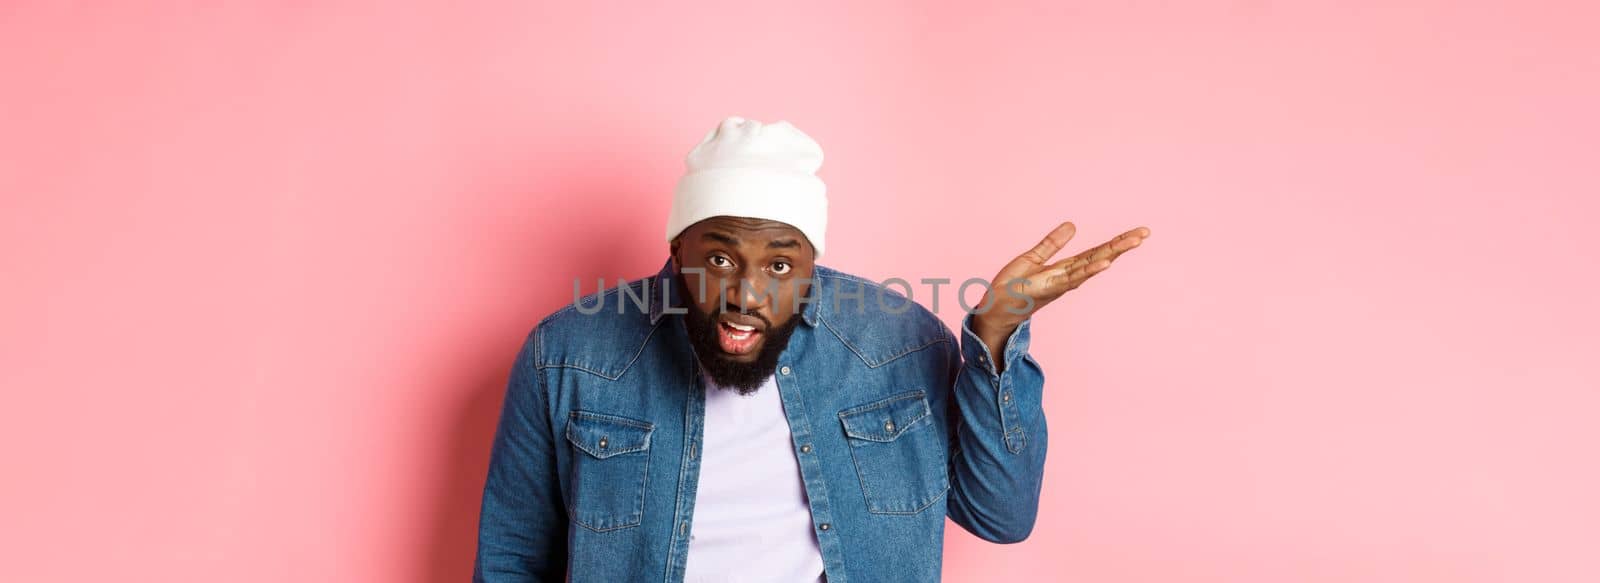 Annoyed and pissed-off Black man arguing, staring at camera and scolding person, standing over pink background.